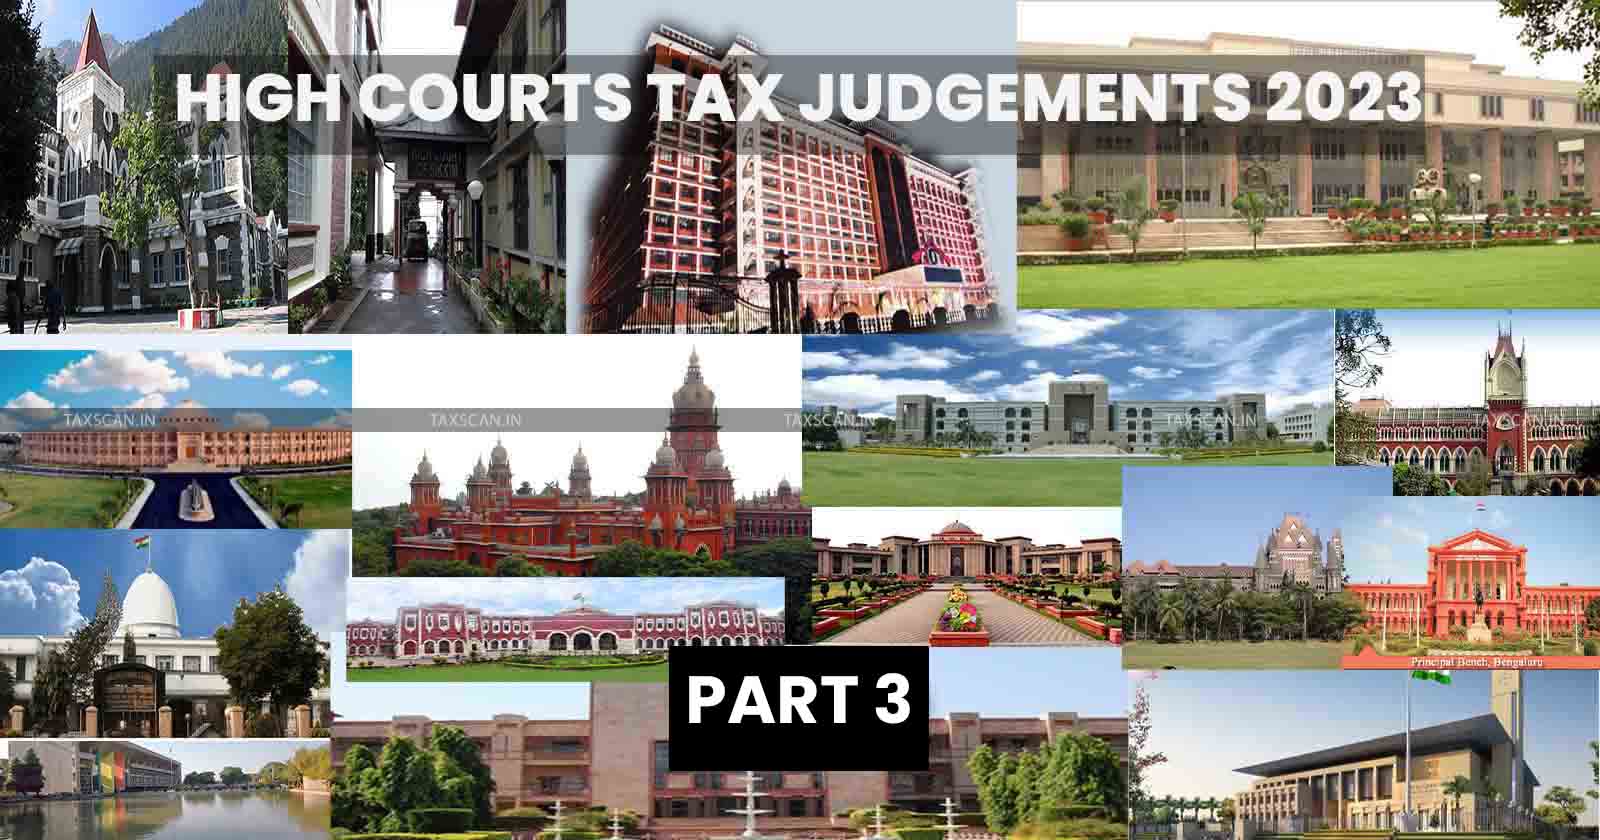 Tax Judgments of High Courts - Annual Case Digest 2023 [Part 3] - TAXSCAN